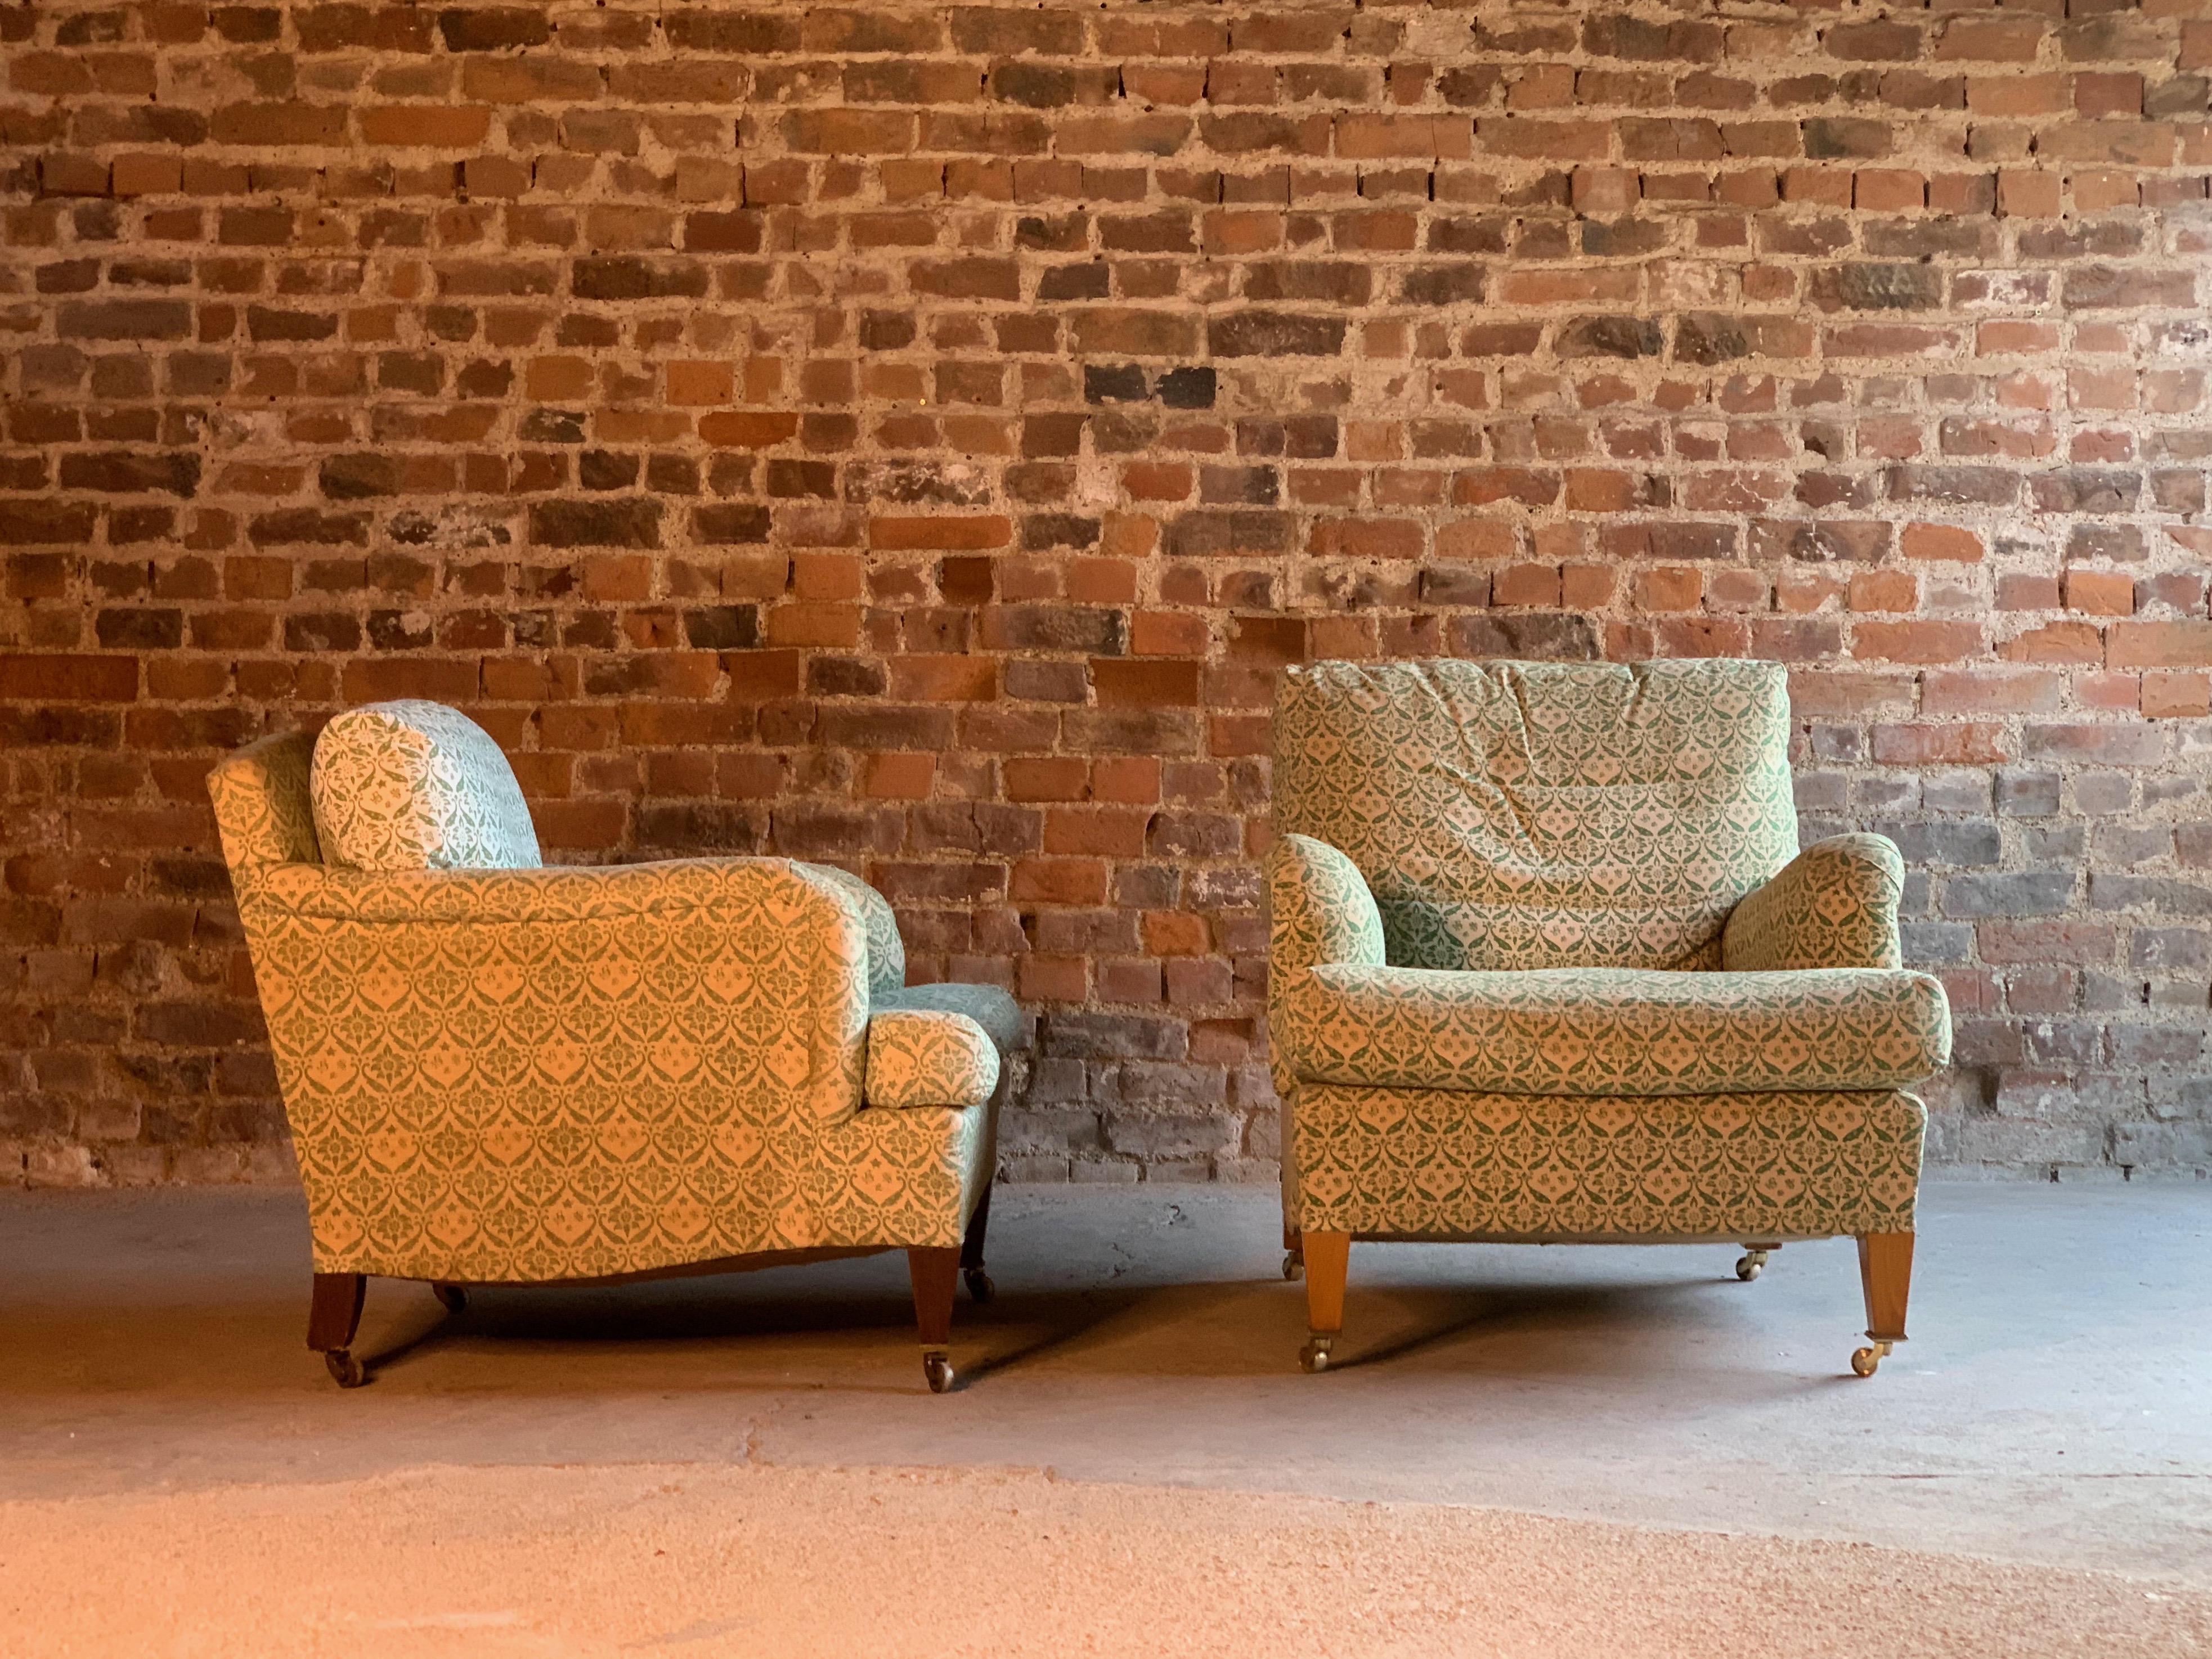 Howard & Sons Bridgewater & Amazone Armchairs Deep Seated Pair Original

Howard & Sons Bridgewater Amazone Armchair by Lenygon & Morant

The second chair is a wonderful small Amazone Howard Armchair by Lenygon & Morant labelled to underside and